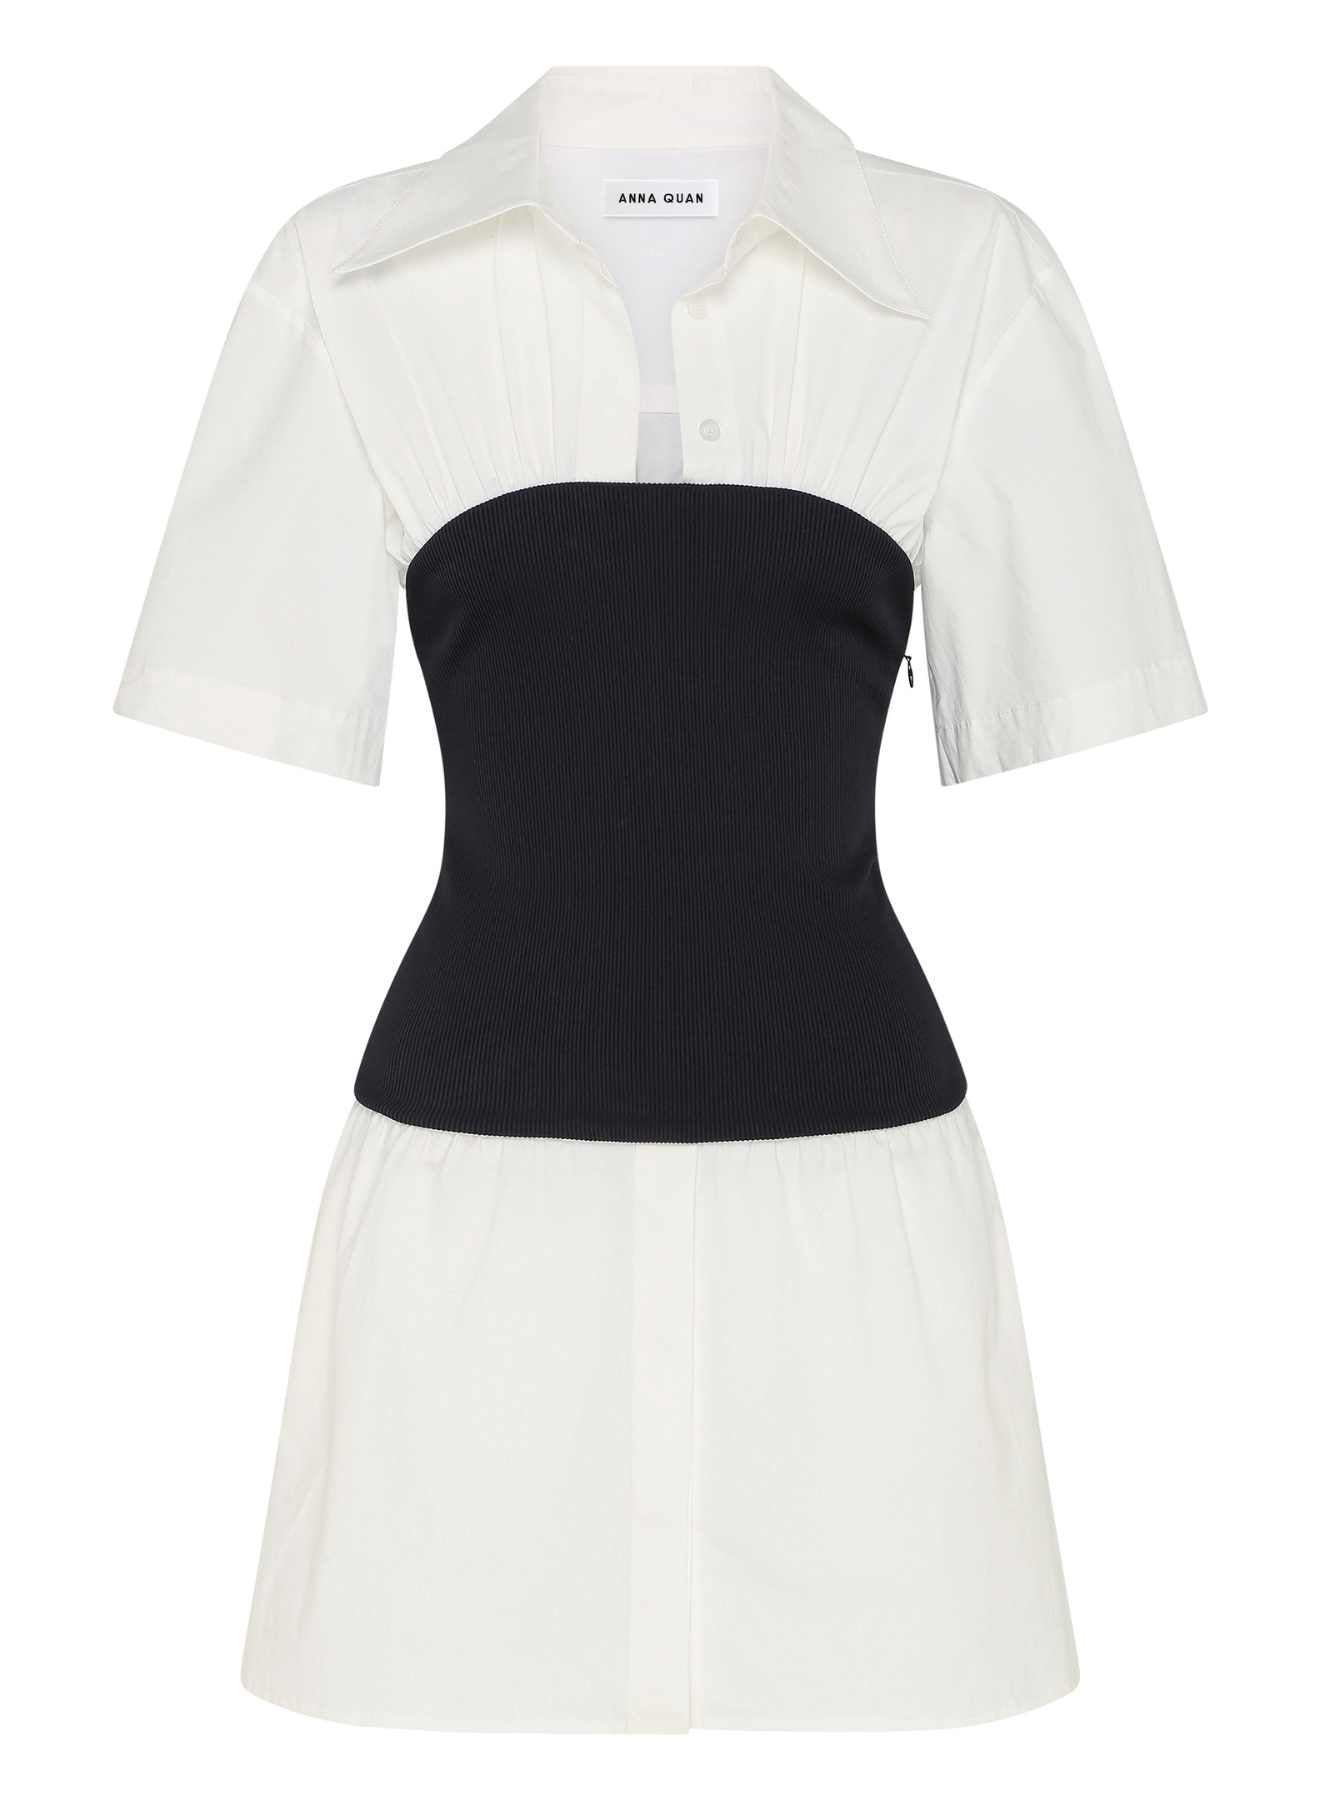 ANNA QUAN's unique Soft Tailoring Mini White Shirt Dress, featuring a contrast jersey rib column skirt. This chic fusion of elements combines the timeless appeal of a white shirt with a modern twist in the torso. White shirt dress, cotton shirt dress, mixed media dress, every day dress, elevated every day dress.